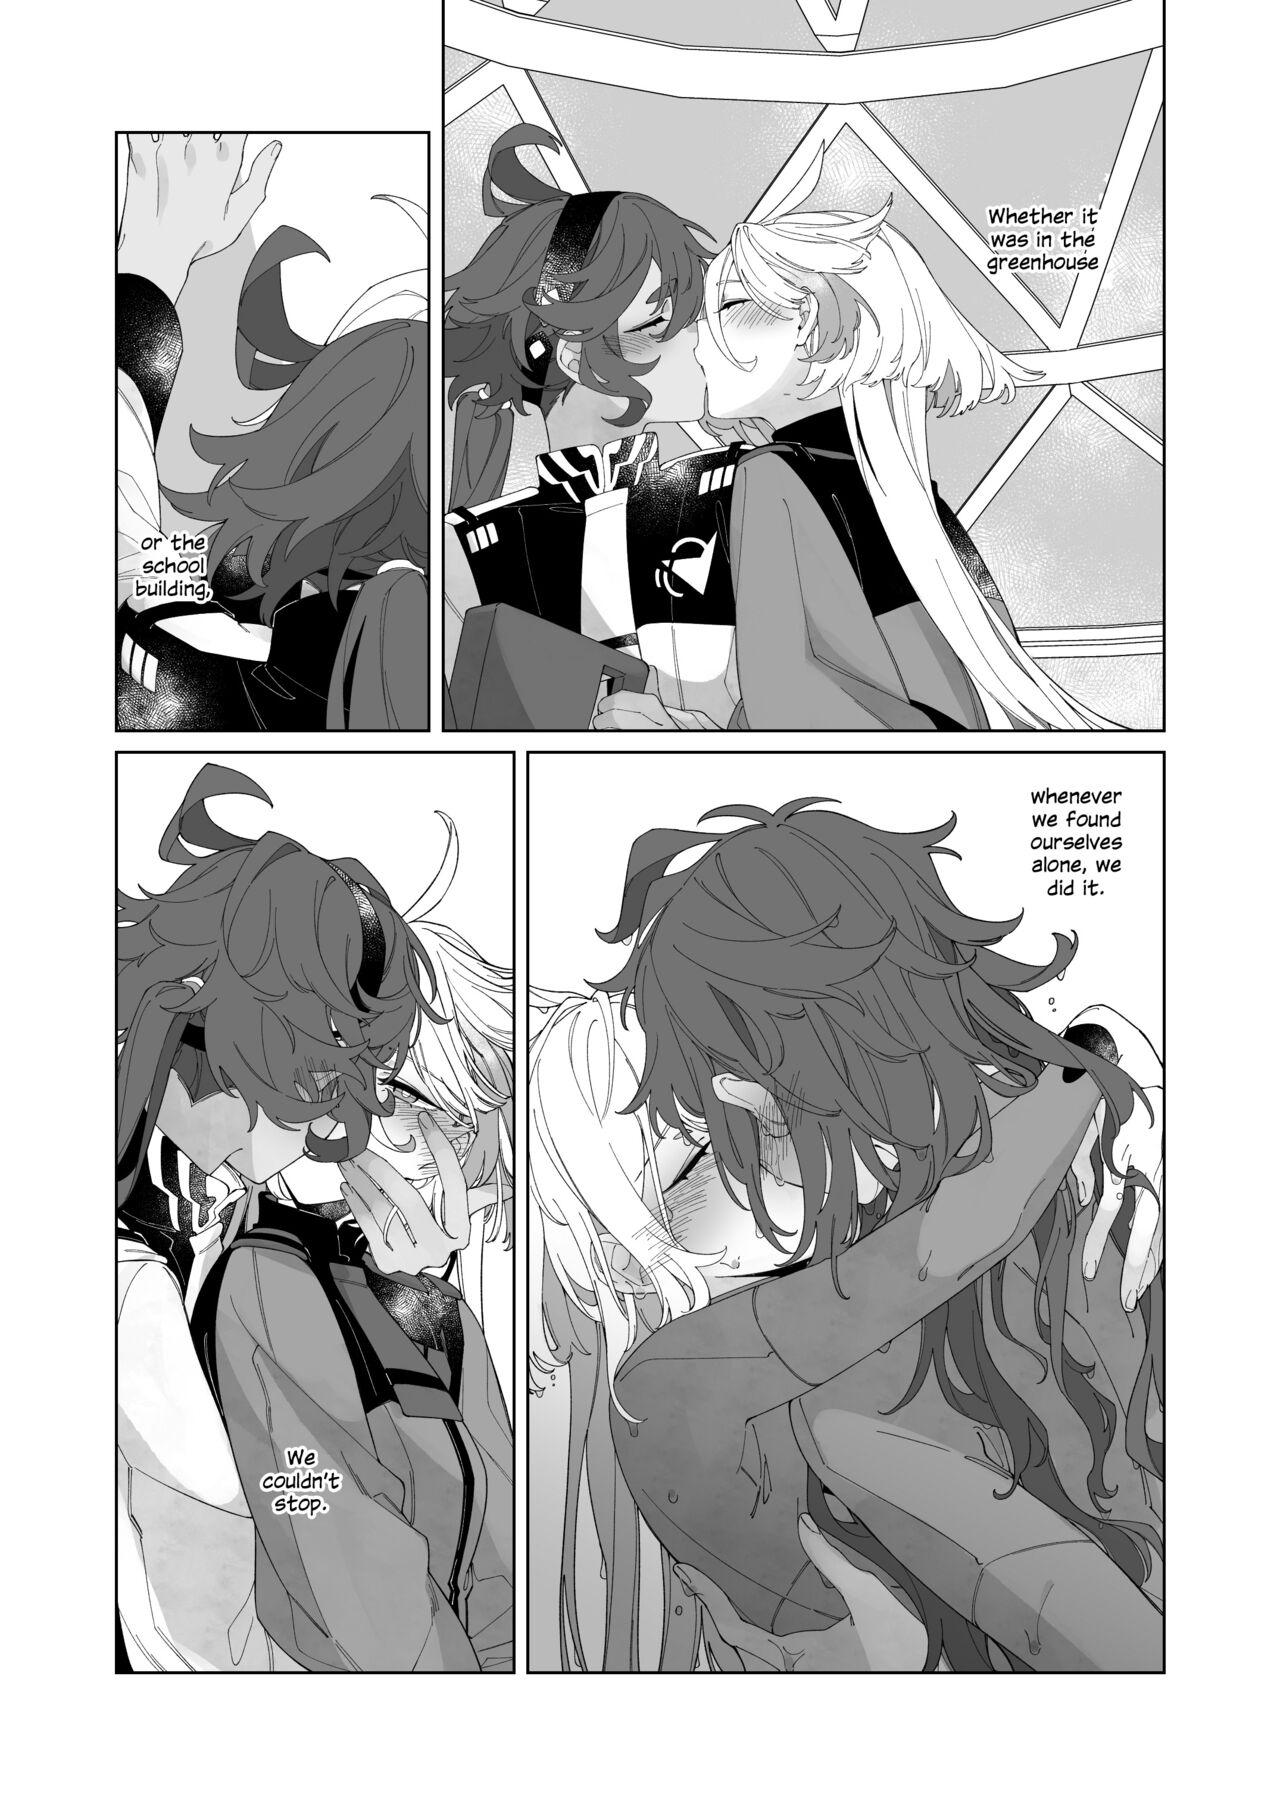 Couch Kiss no Ato Nani ga Shitai? | After Kissing, What Else Do You Want to Do? - Mobile suit gundam the witch from mercury Step - Page 8